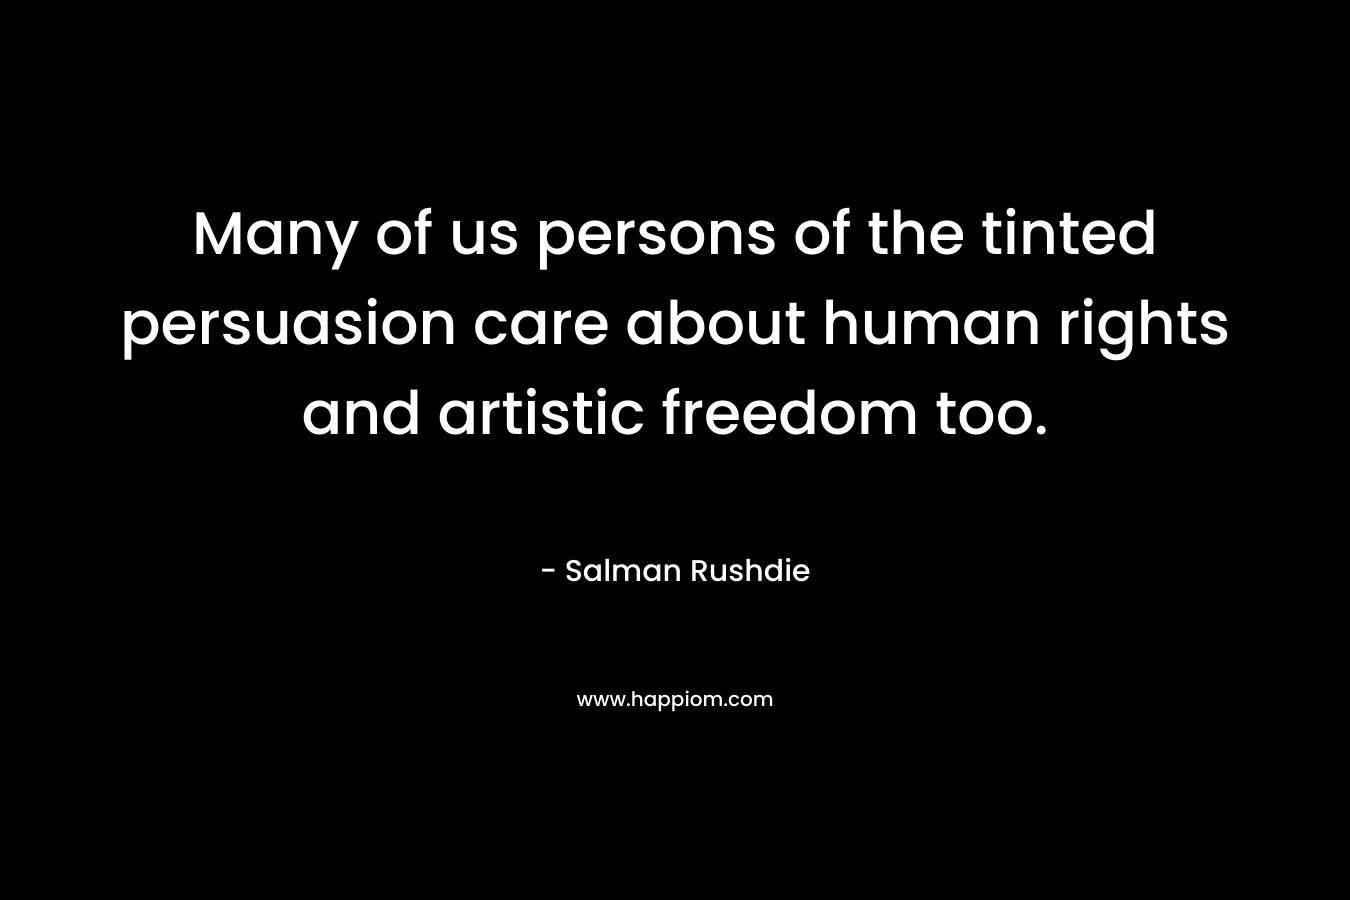 Many of us persons of the tinted persuasion care about human rights and artistic freedom too. – Salman Rushdie